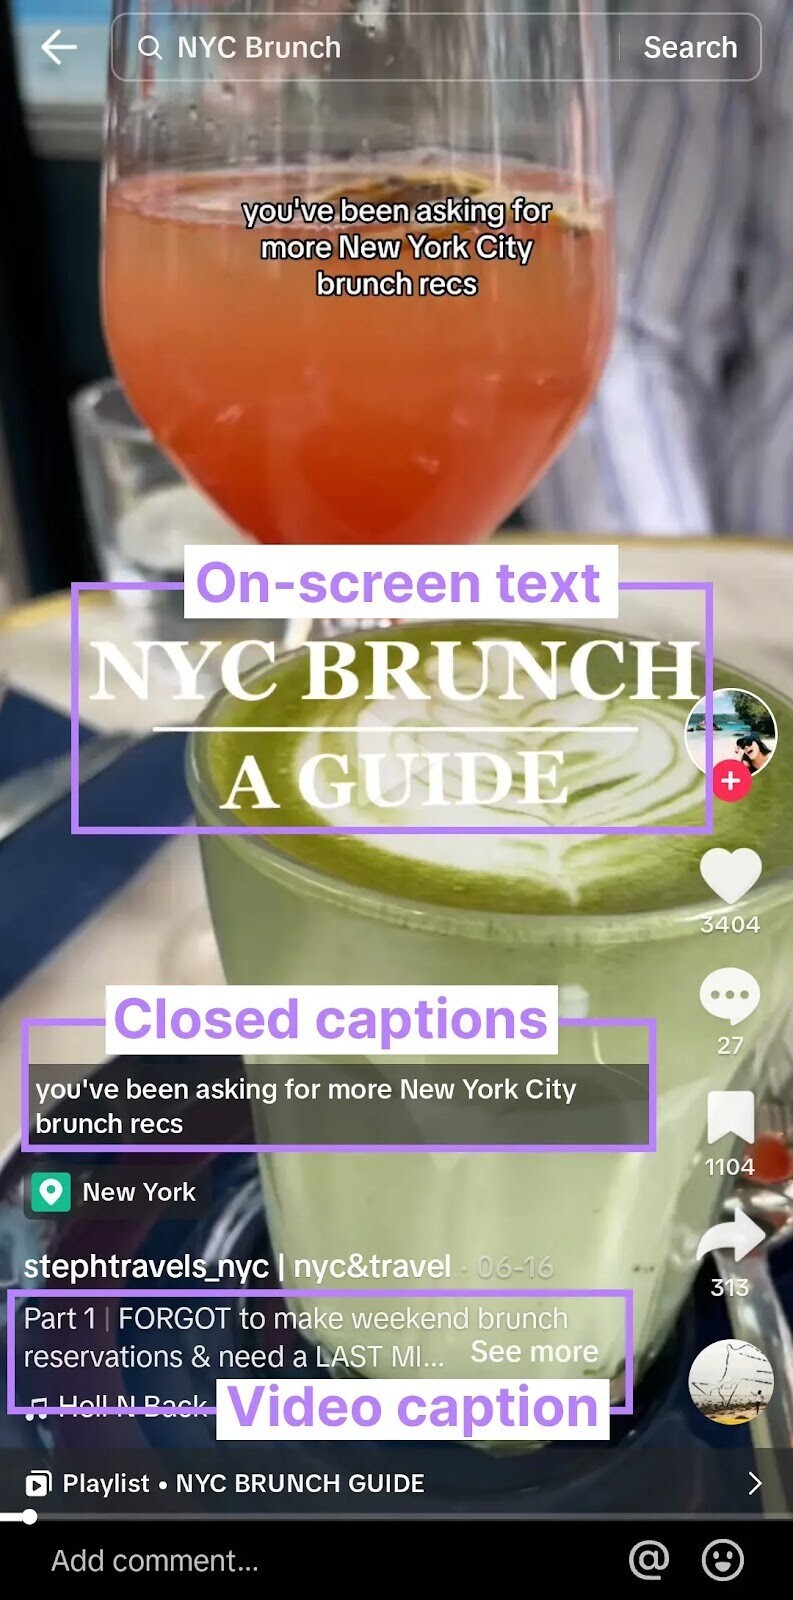 TikTok’s video titled “NYC Brunch A Guide"